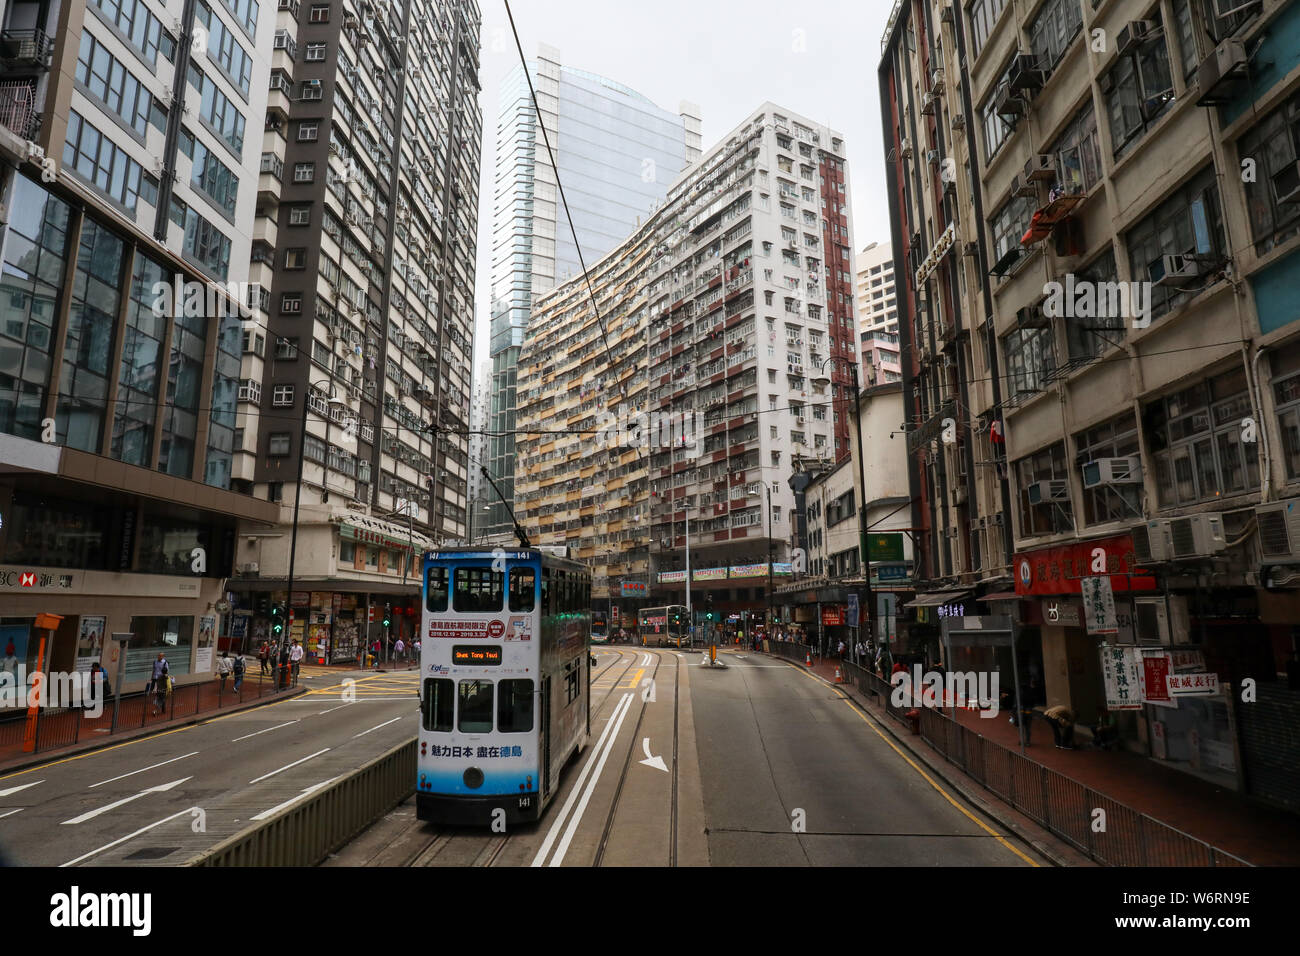 Street view of King's Road from upper deck of double-decker tram in North Point, Hong Kong Stock Photo